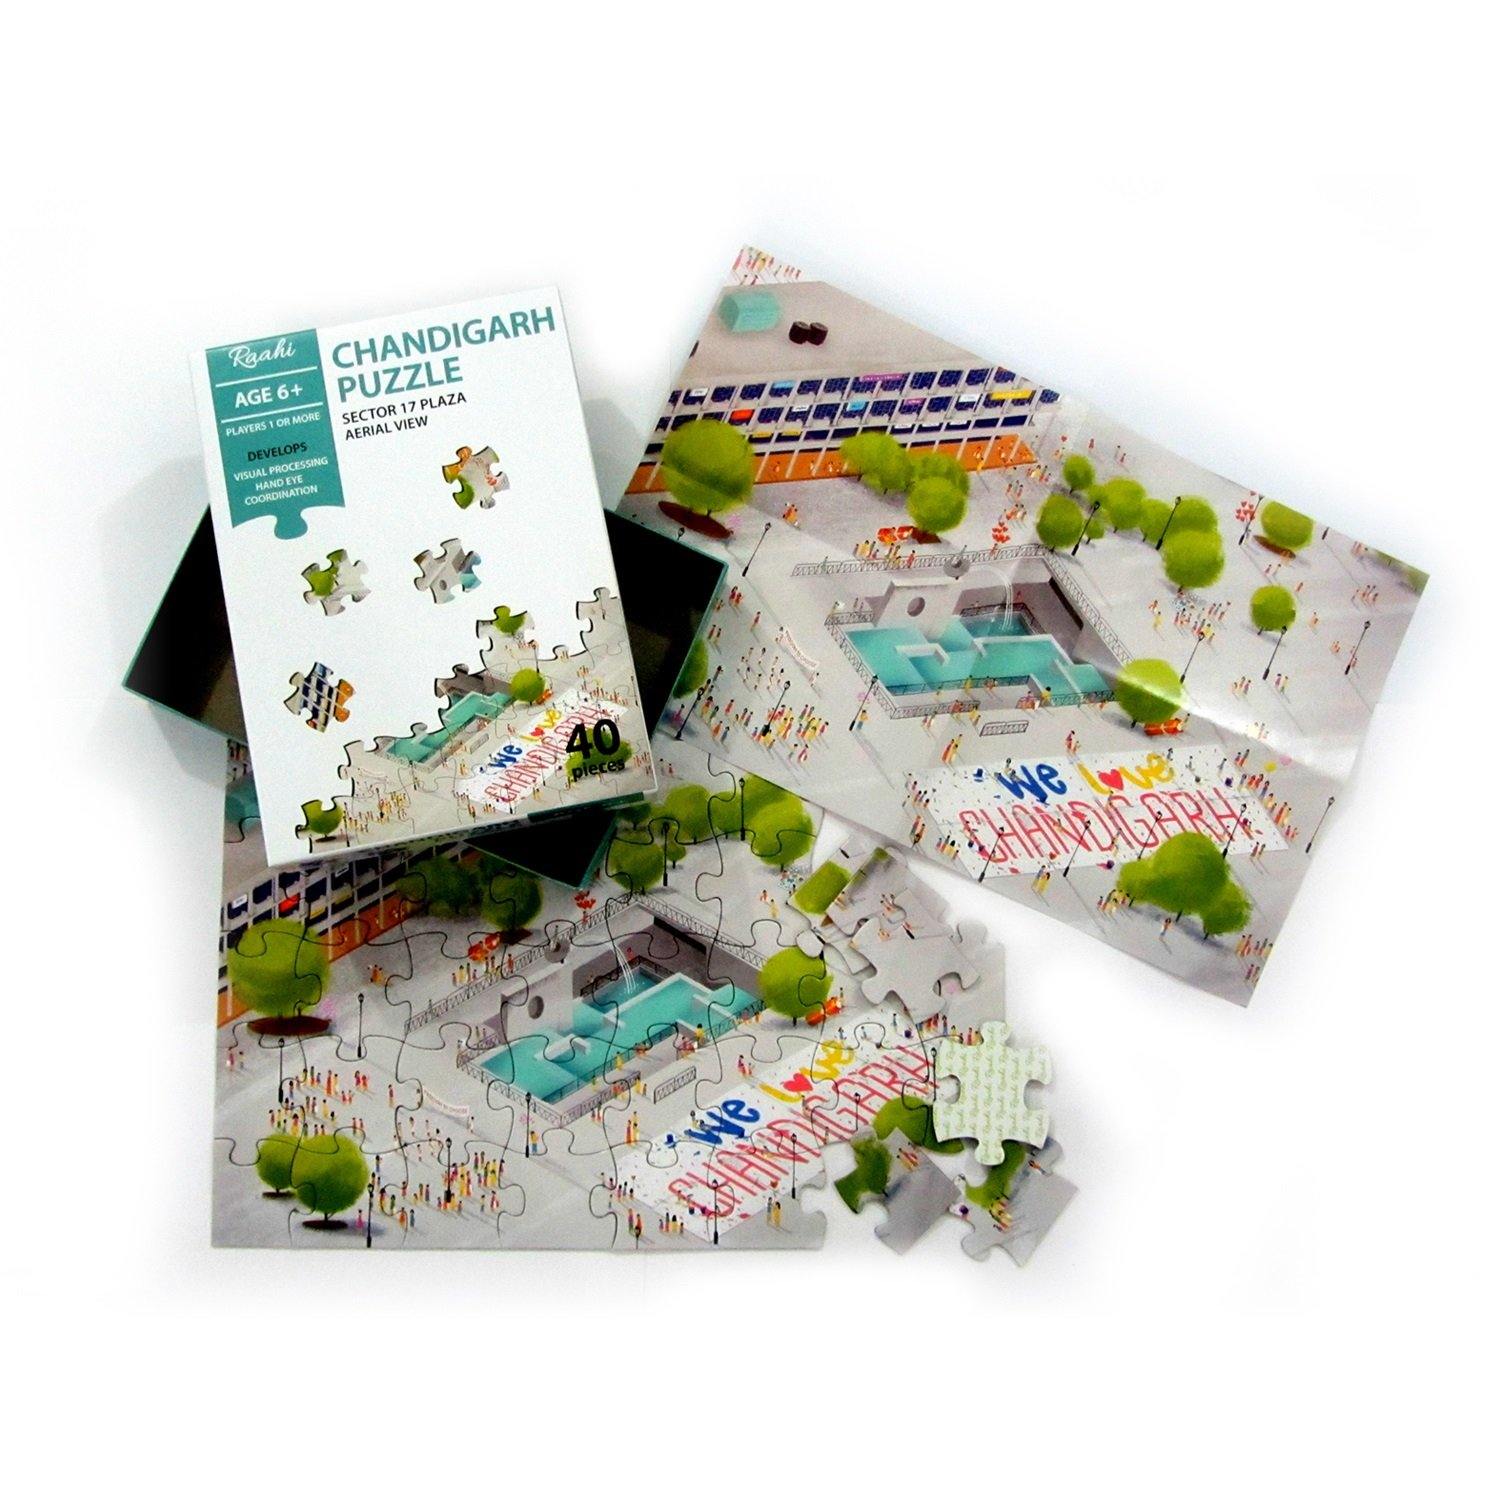 Chandigarh Puzzle Combo - Pack of 2 - Raahi